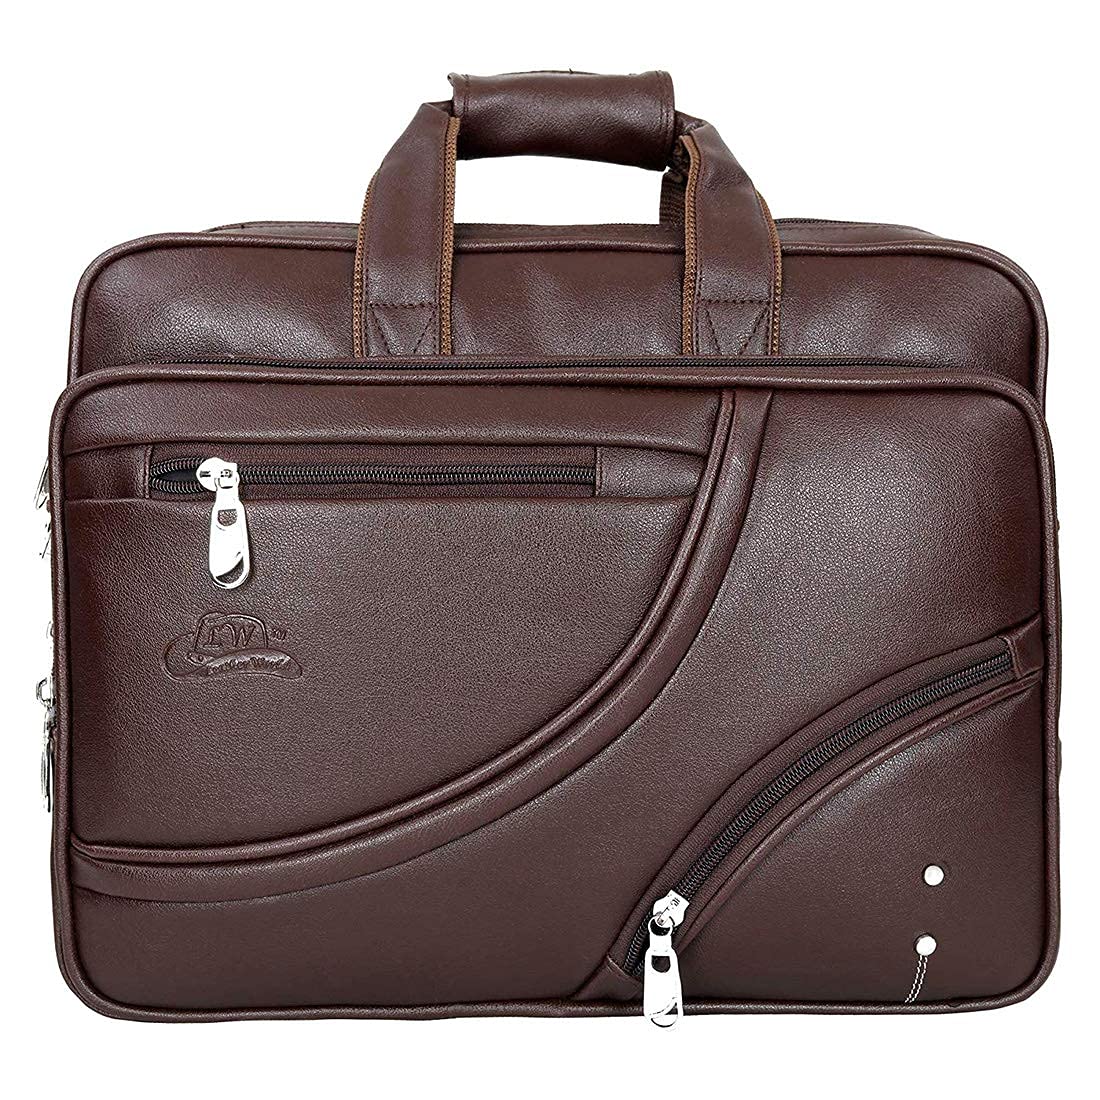 Leather World Pu Leather Expandable 15.6 inch Laptop Bag Office Bag for Men and Women Briefcase- Brown